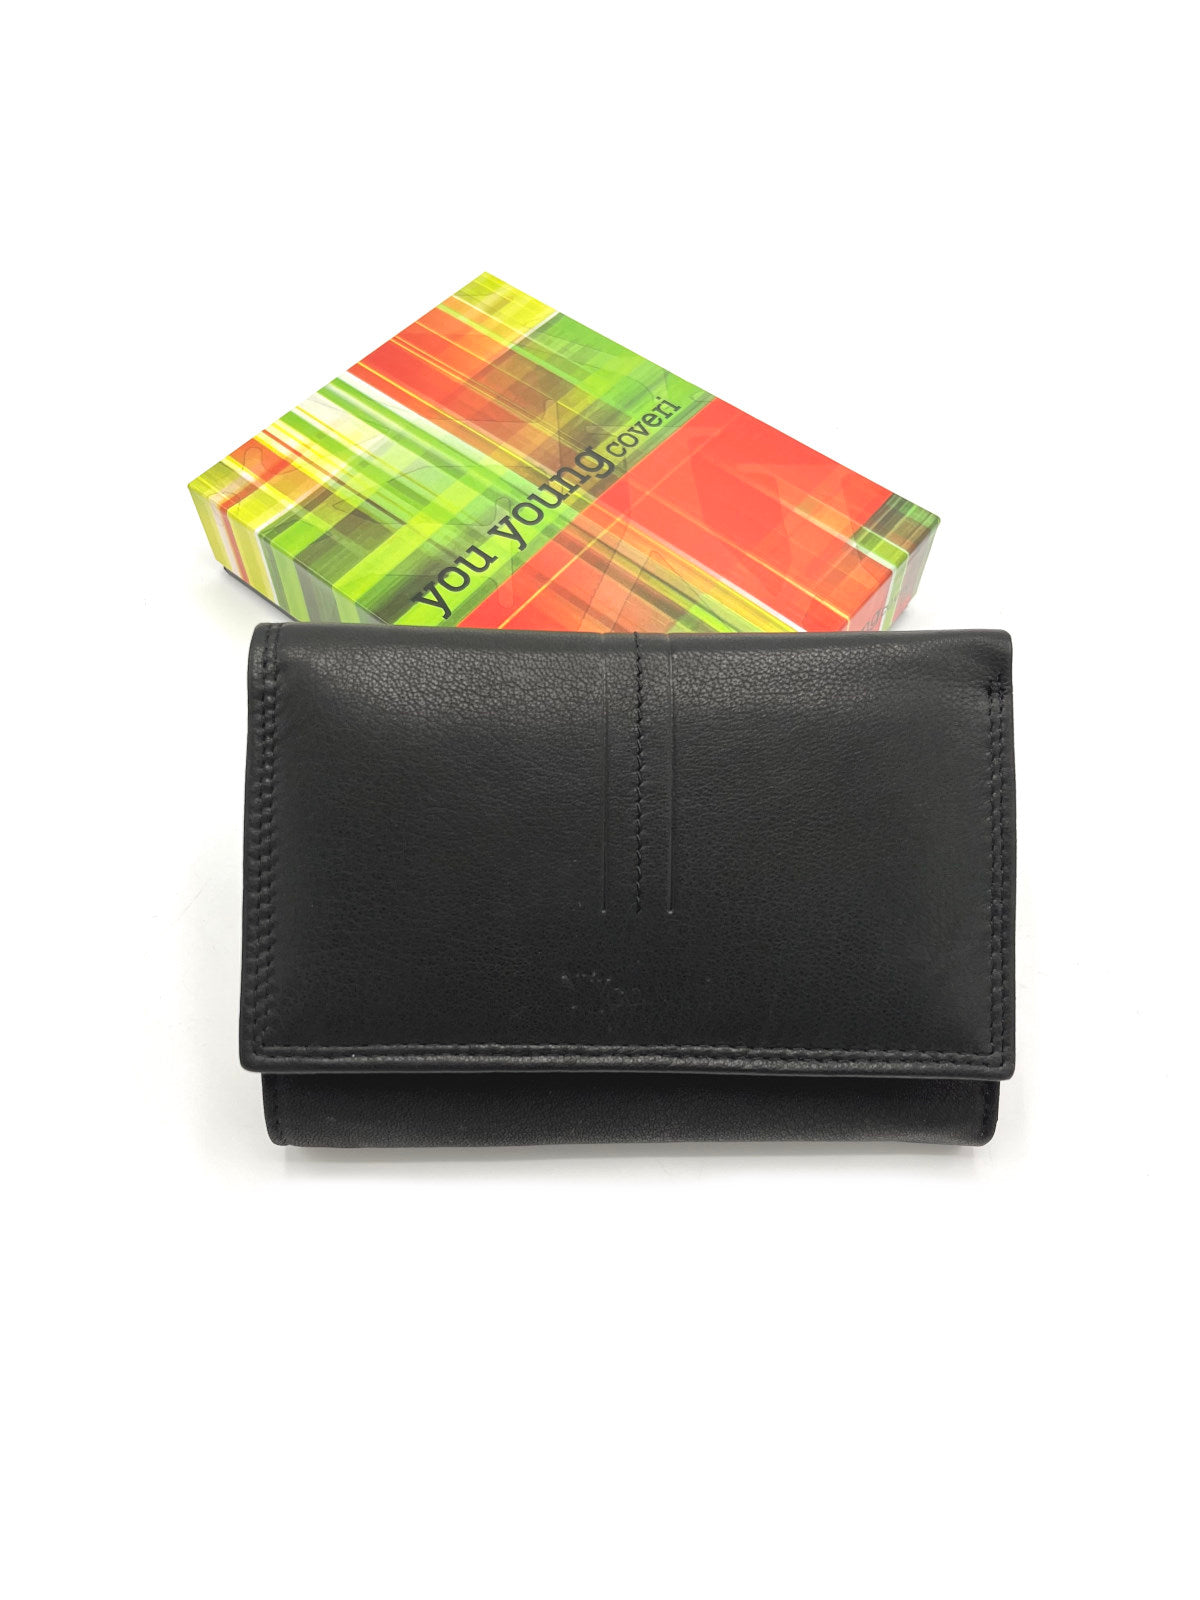 Genuine leather wallet for women, Brand You Young Coveri, art. GAVI8065.422